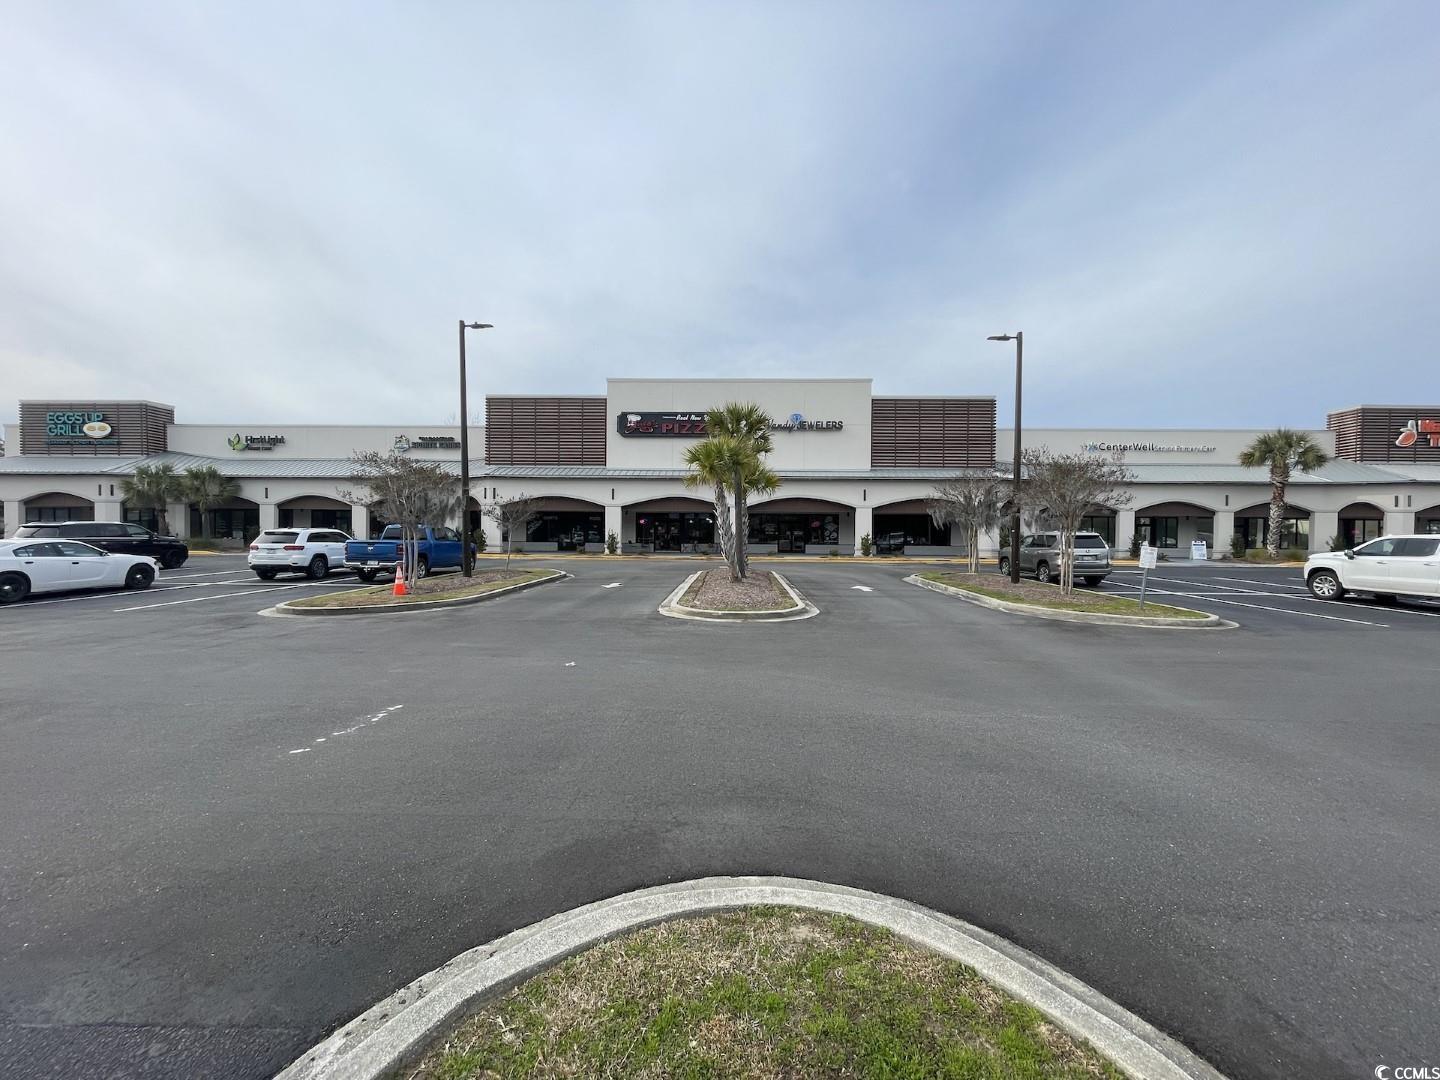 for lease:  1,833 sf in-line restaurant with hood and two restrooms.  the oasis is an established retail strip center located in the garden city/murrells inlet area. in 2023, landlord finished a complete architectural renovation. tenants include eggs up grill, centerwell senior primary care, gino's pizza, vandy jewelers, first light home care and thai cuisine. additional features include covered walkway (sufficient for outdoor seating), storefront signage and lighted pylon signage. square footage is approximate and not guaranteed. buyer responsible for verification.